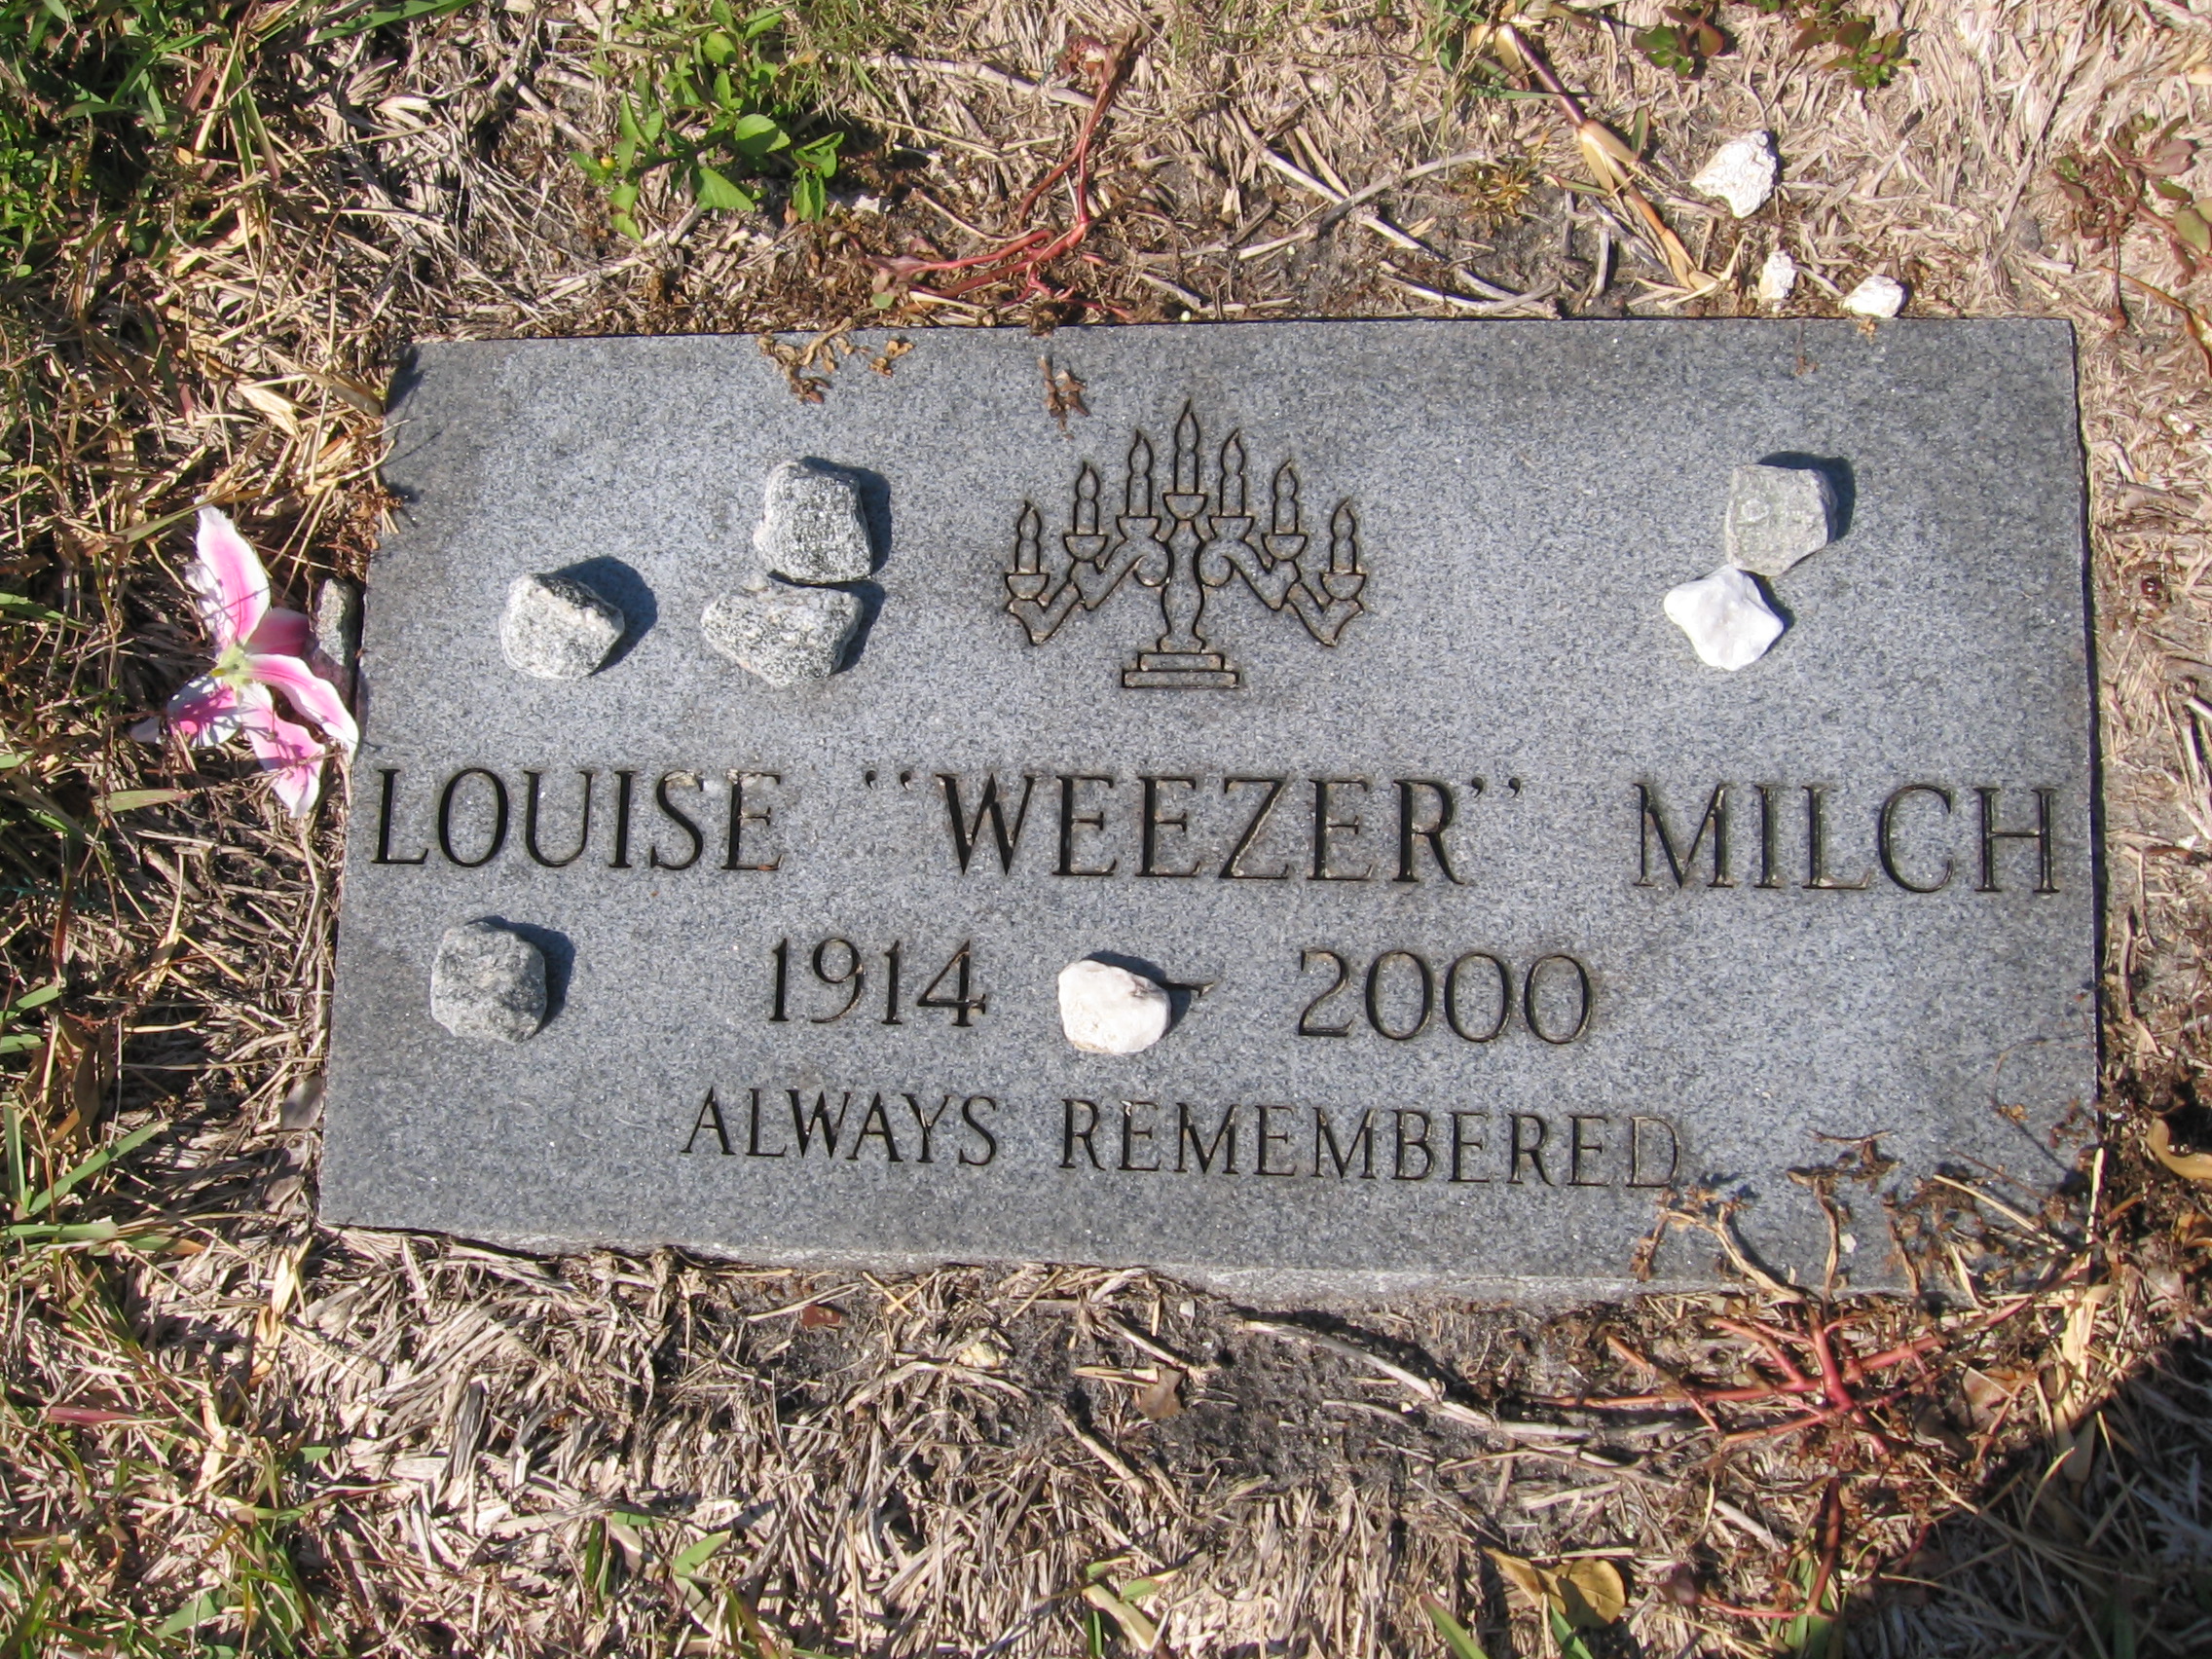 Louise "Weezer" Milch